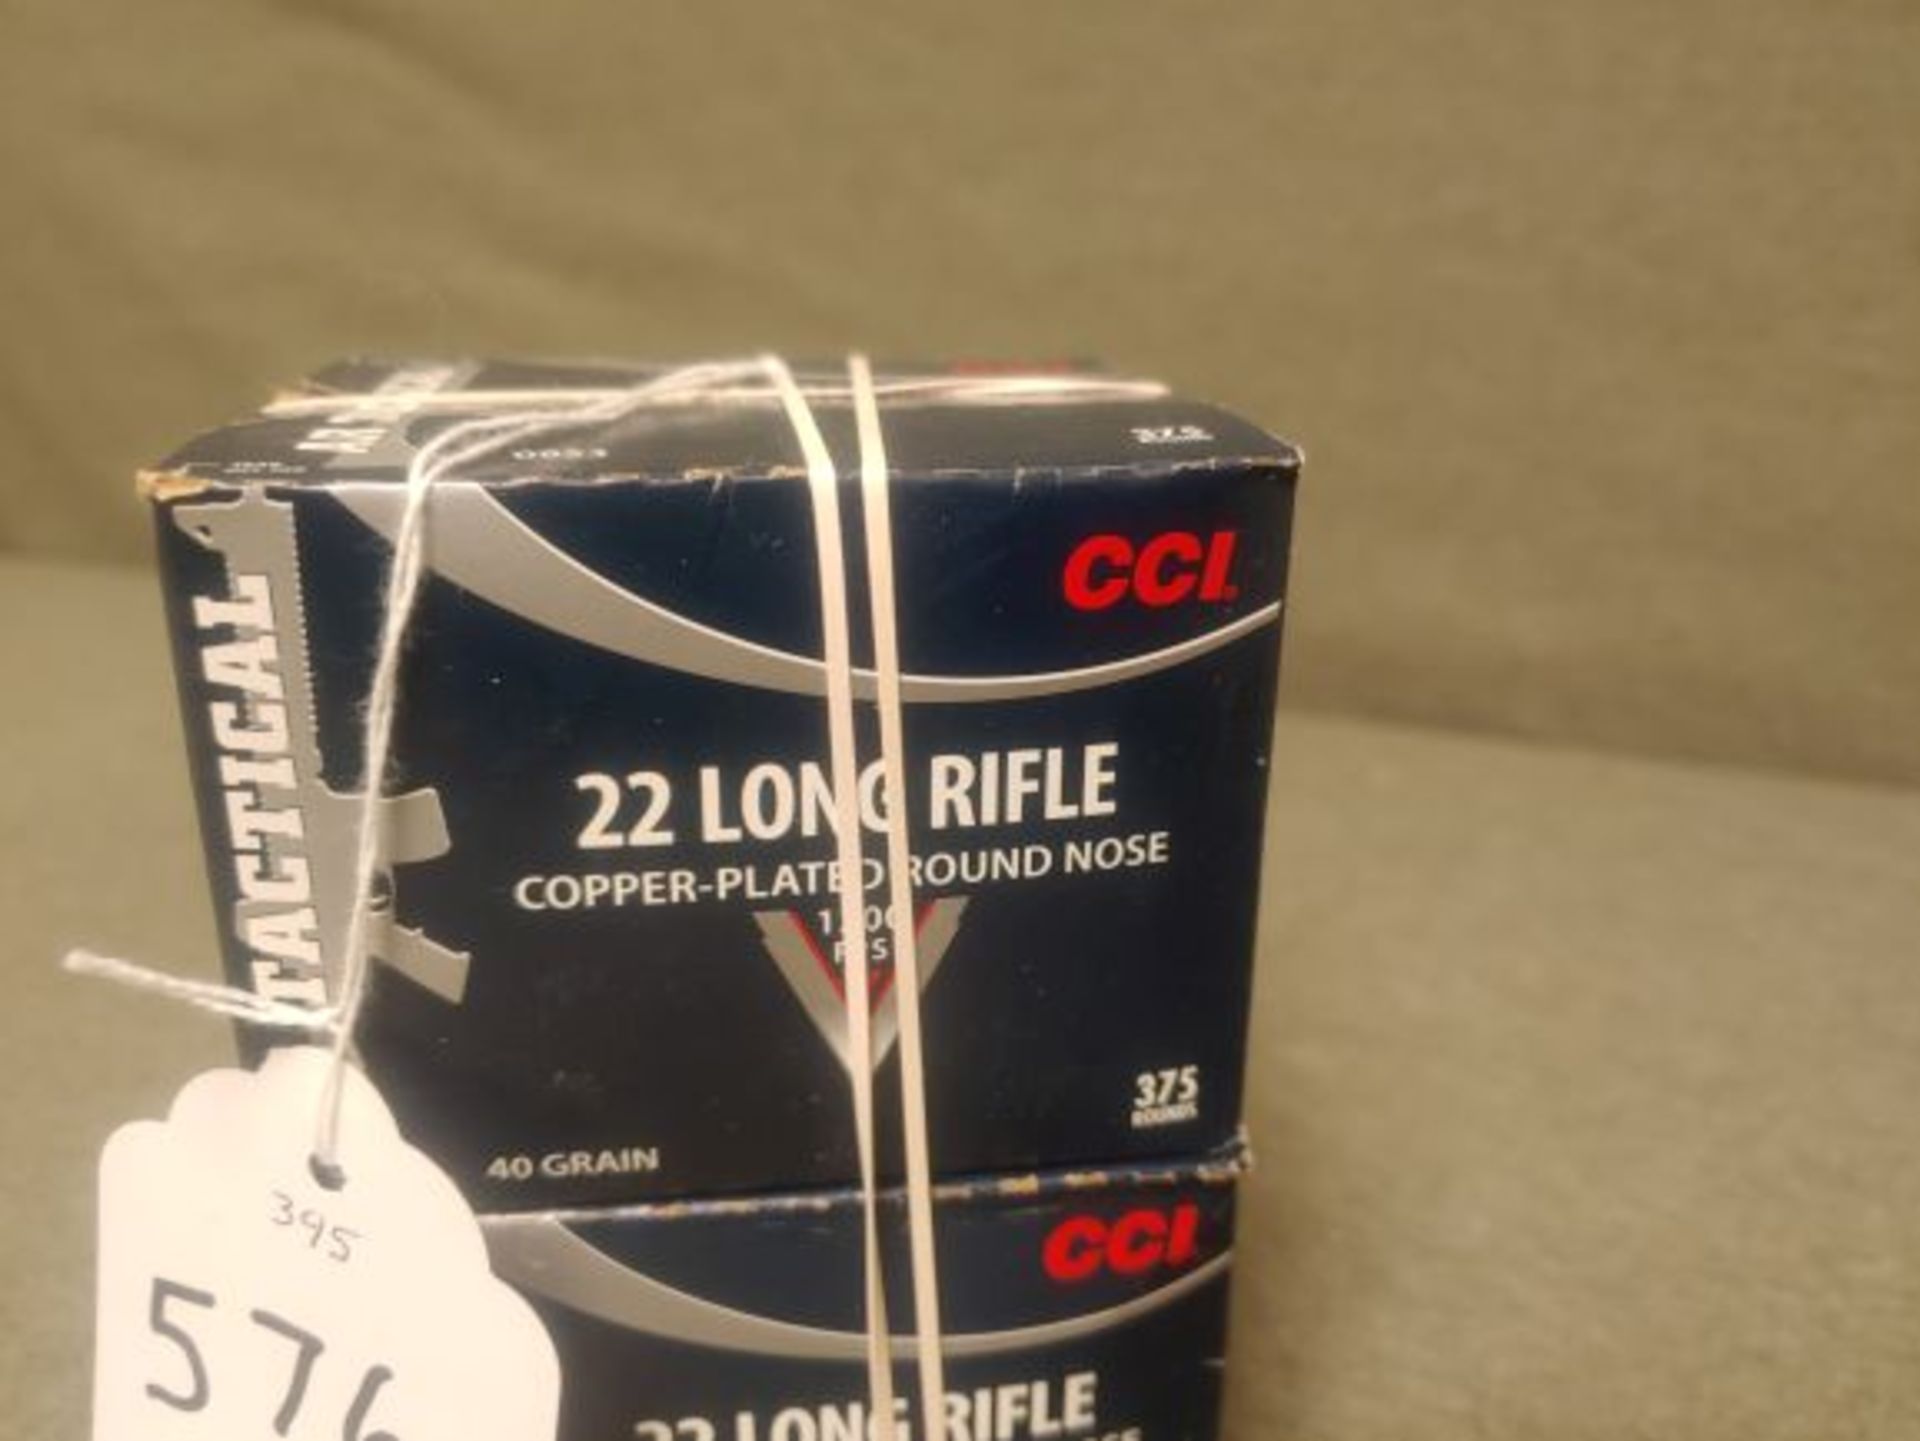 576. CCI Tactical .22LR CP RN, 375 Rnd. Boxes (2x the Money) - Image 2 of 2